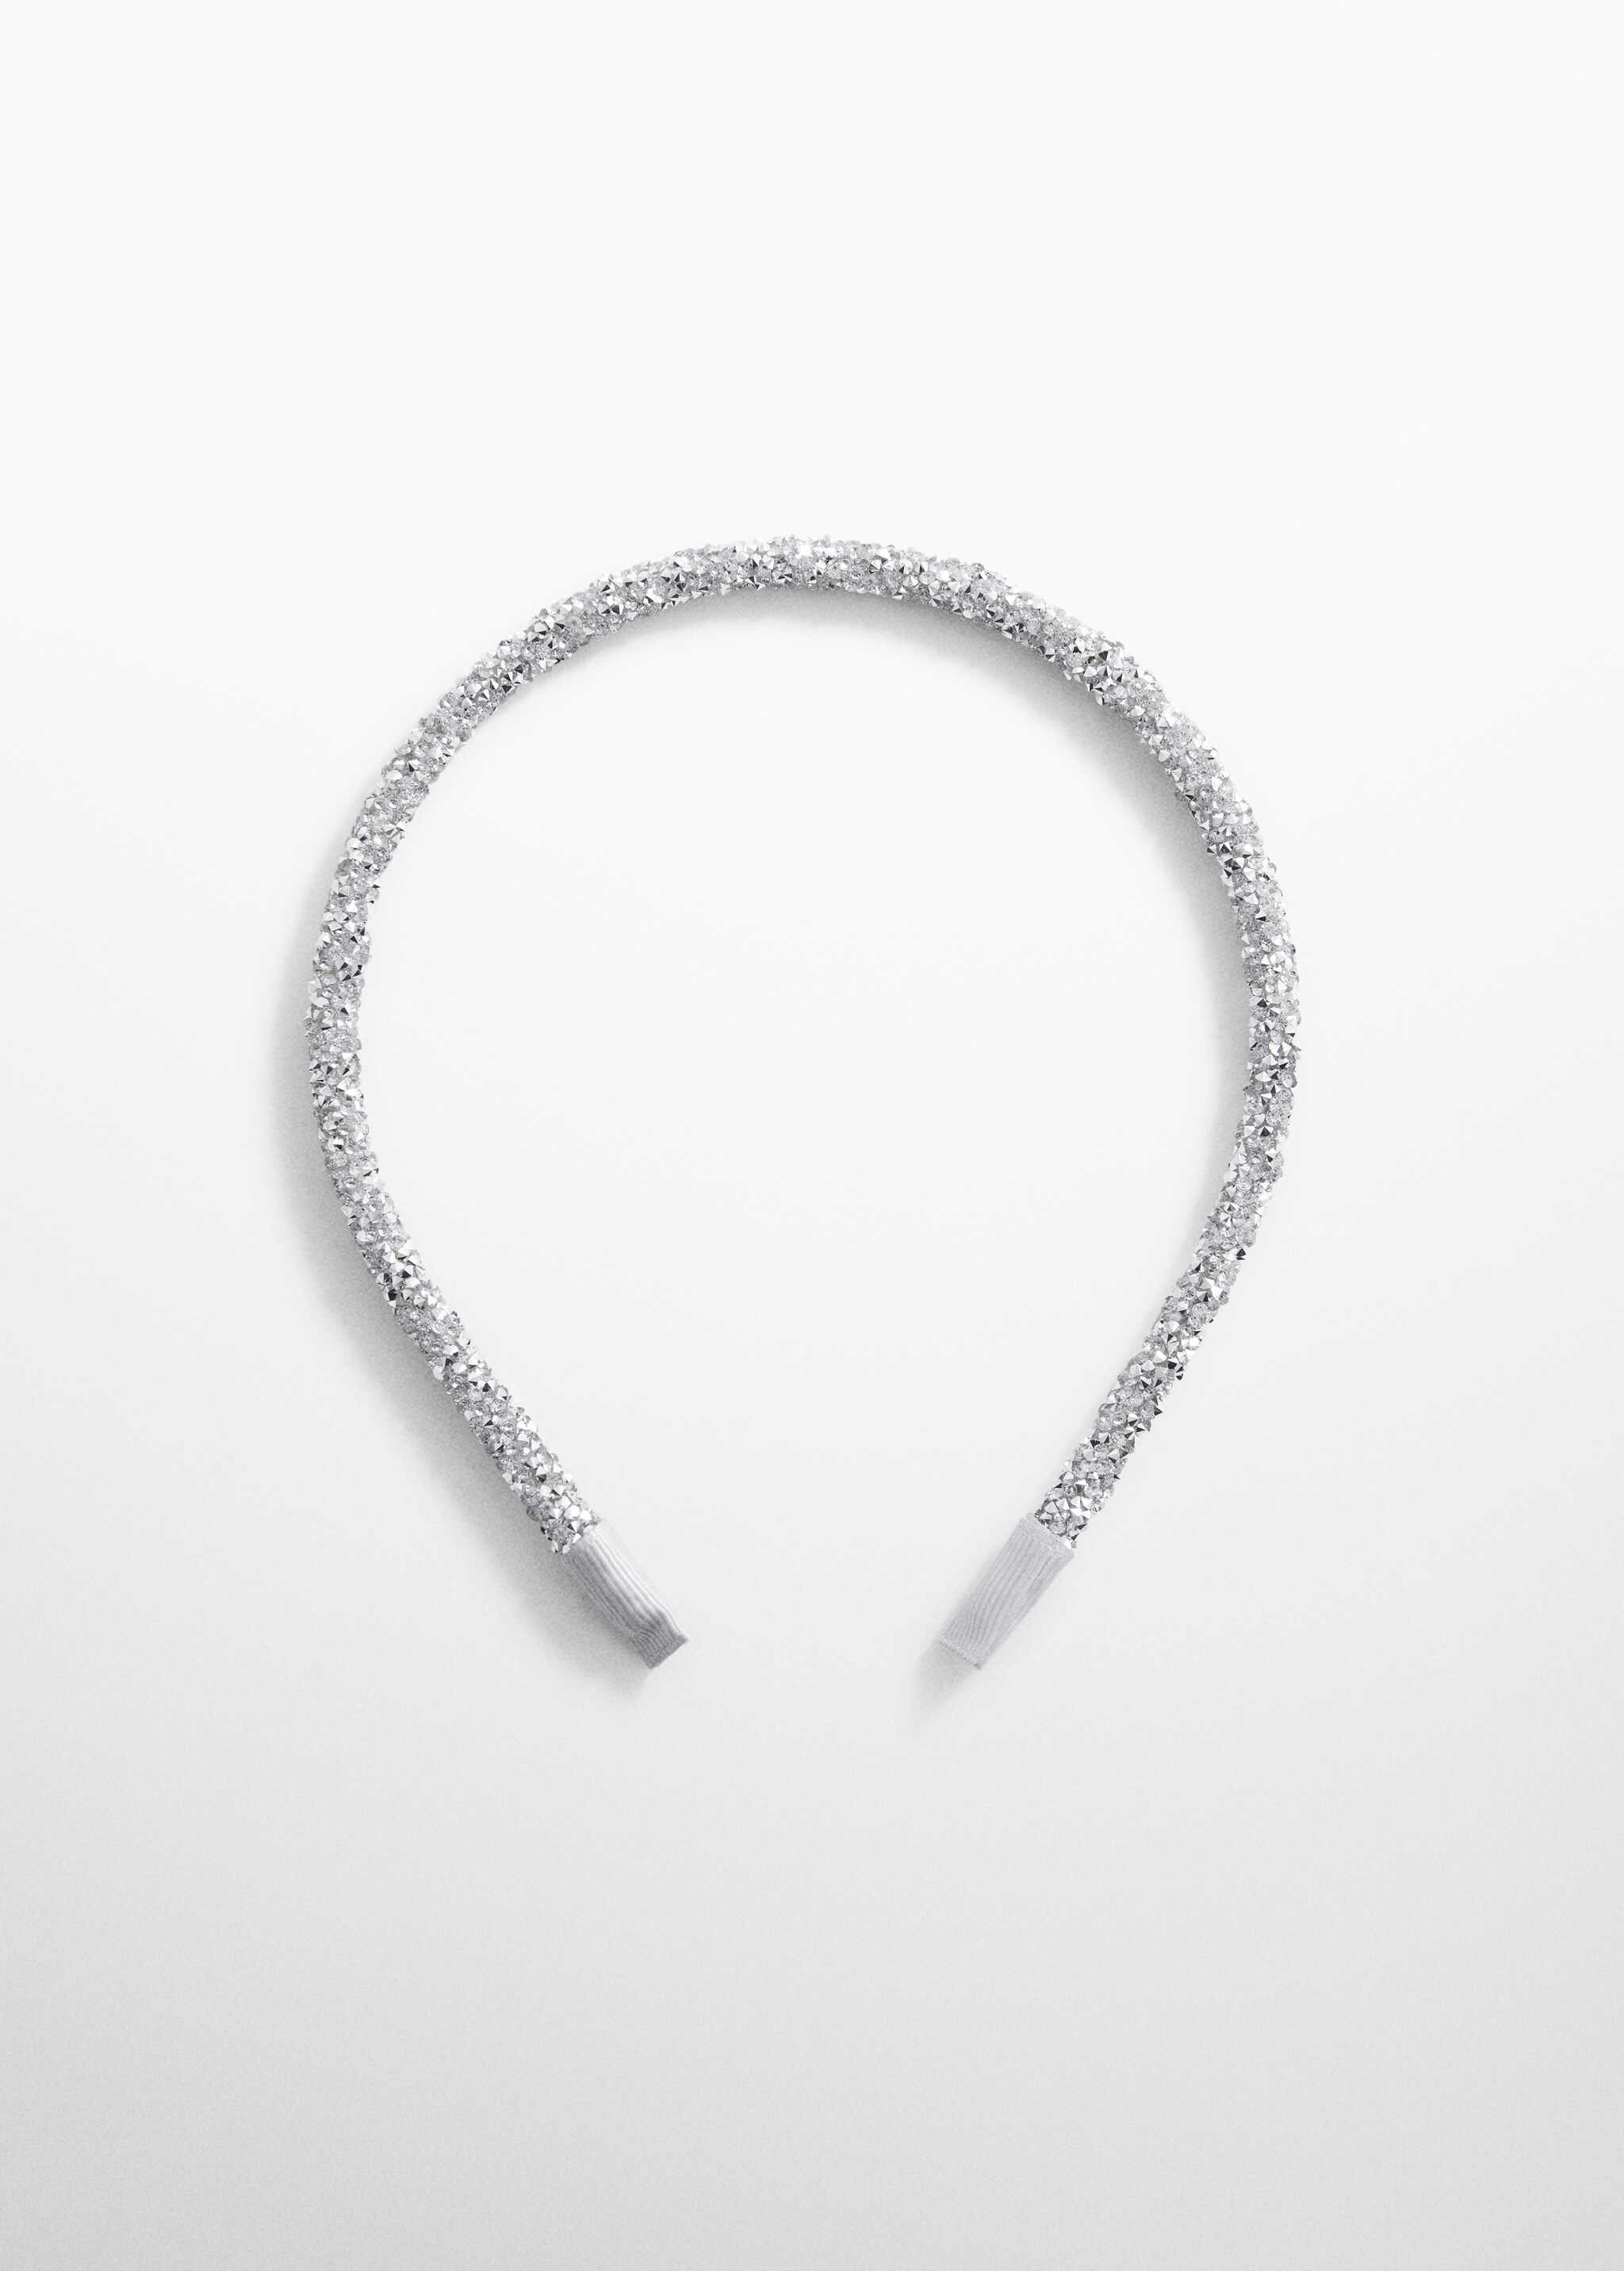 Faceted crystal hairband - Article without model